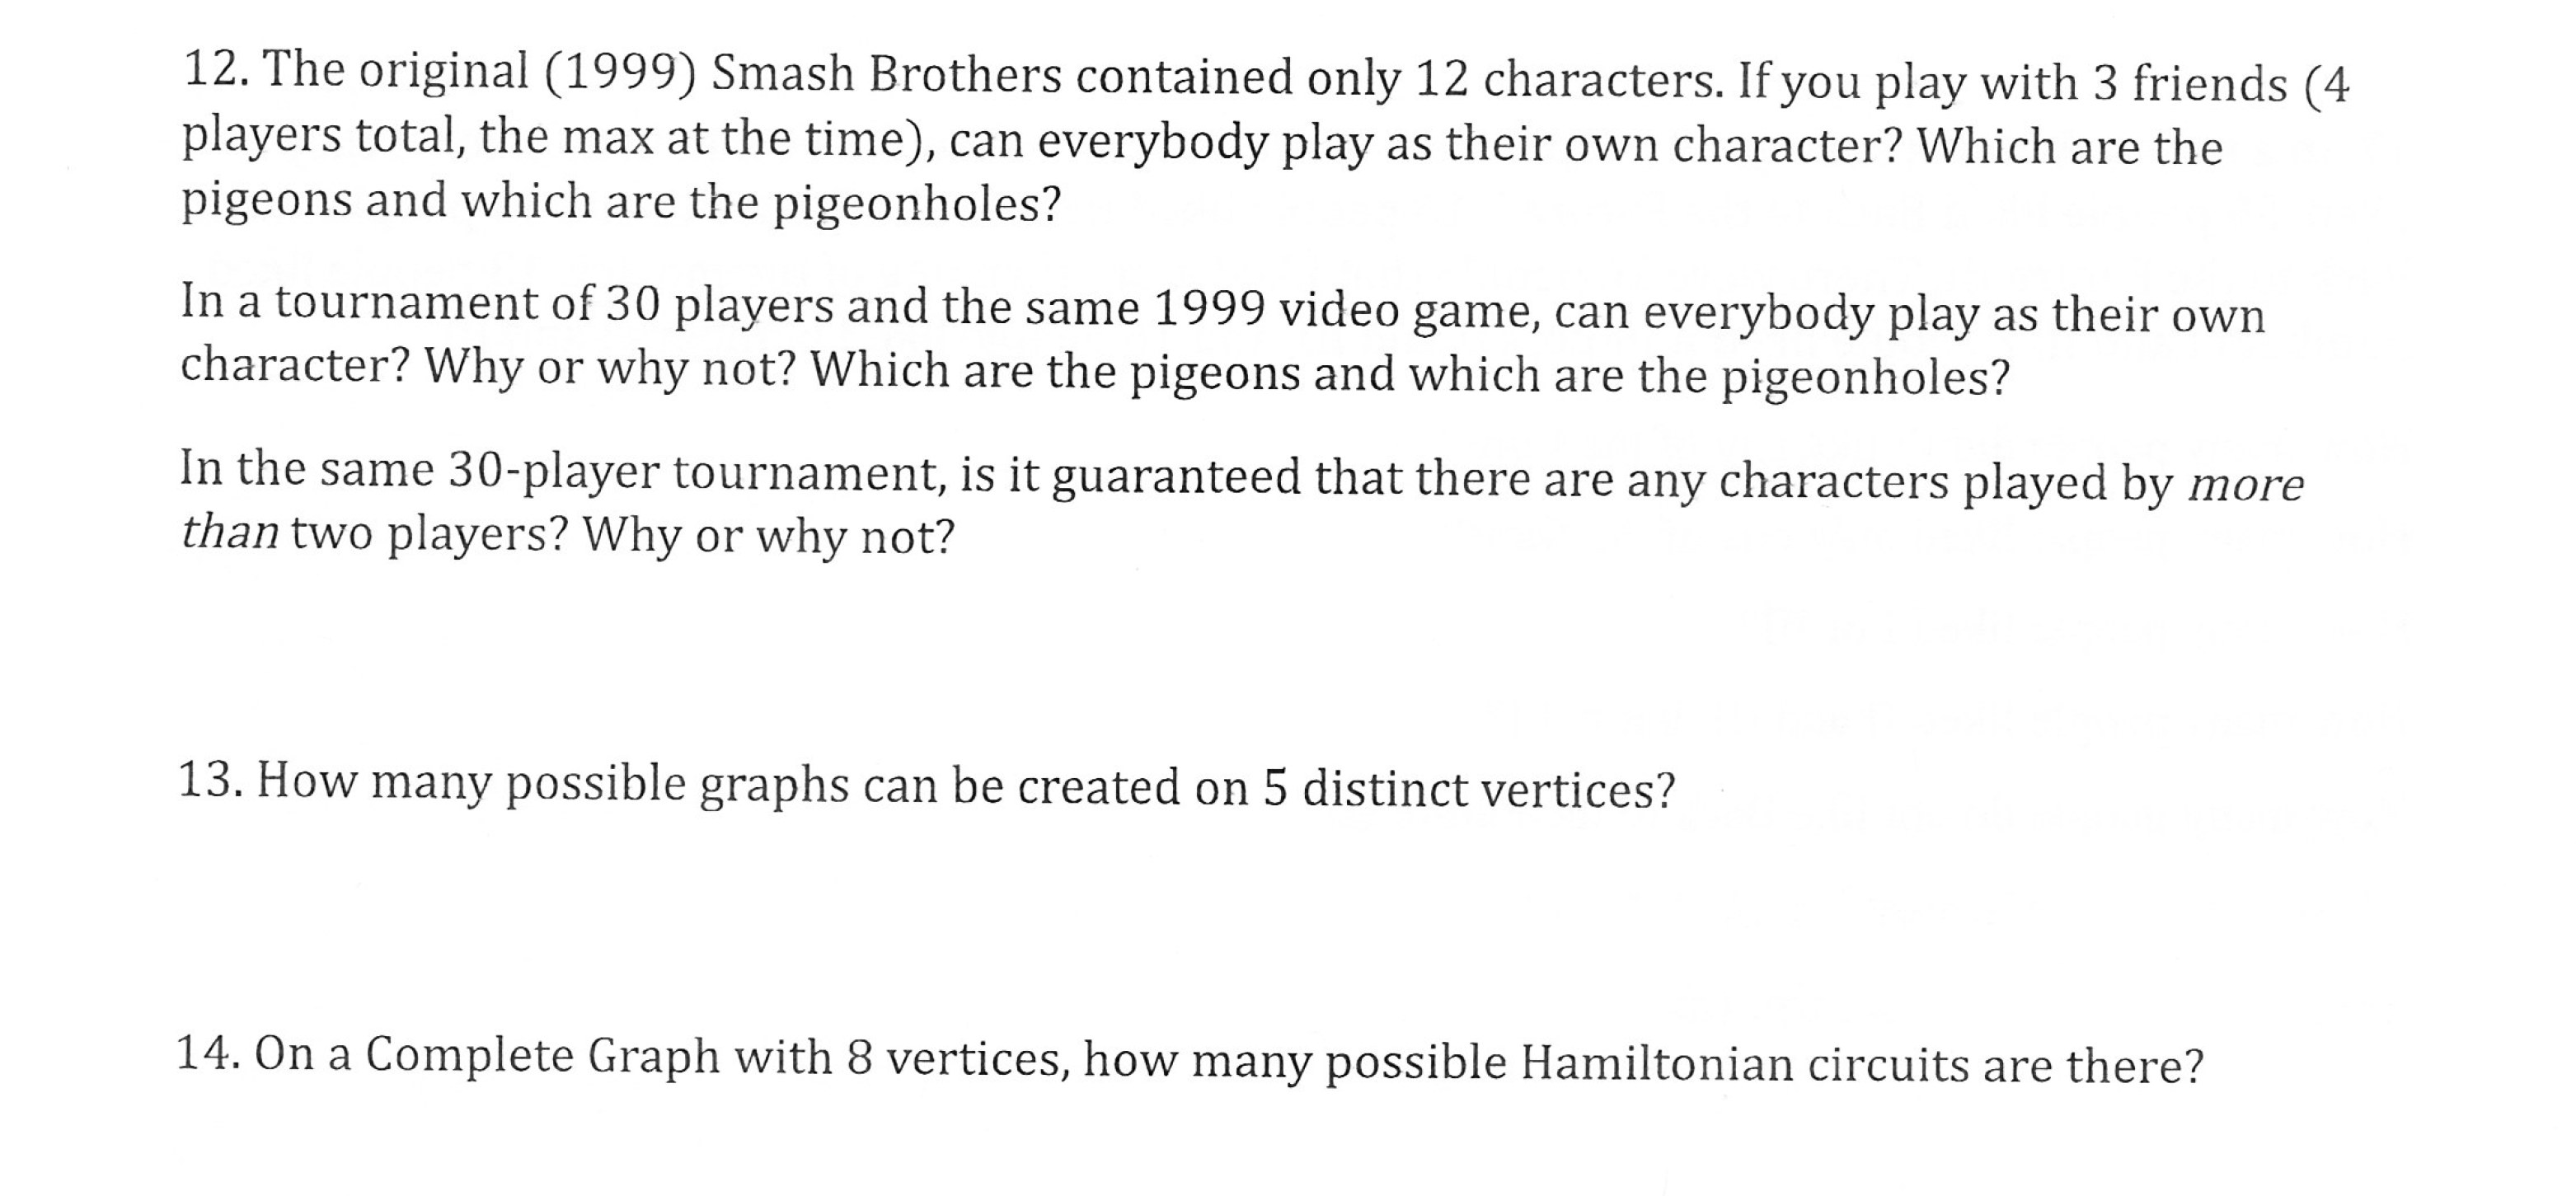 12. The original (1999) Smash Brothers contained only 12 characters. If you play with 3 friends (4
players total, the max at the time), can everybody play as their own character? Which are the
pigeons and which are the pigeonholes?
In a tournament of 30 players and the same 1999 video game, can everybody play as their own
character? Why or why not? Which are the pigeons and which are the pigeonholes?
In the same 30-player tournament, is it guaranteed that there are any characters played by more
than two players? Why or why not?
13. How many possible graphs can be created on 5 distinct vertices?
n a Complete Graph with 8 vertices, how many possible Hamiltonian circuits are there?
